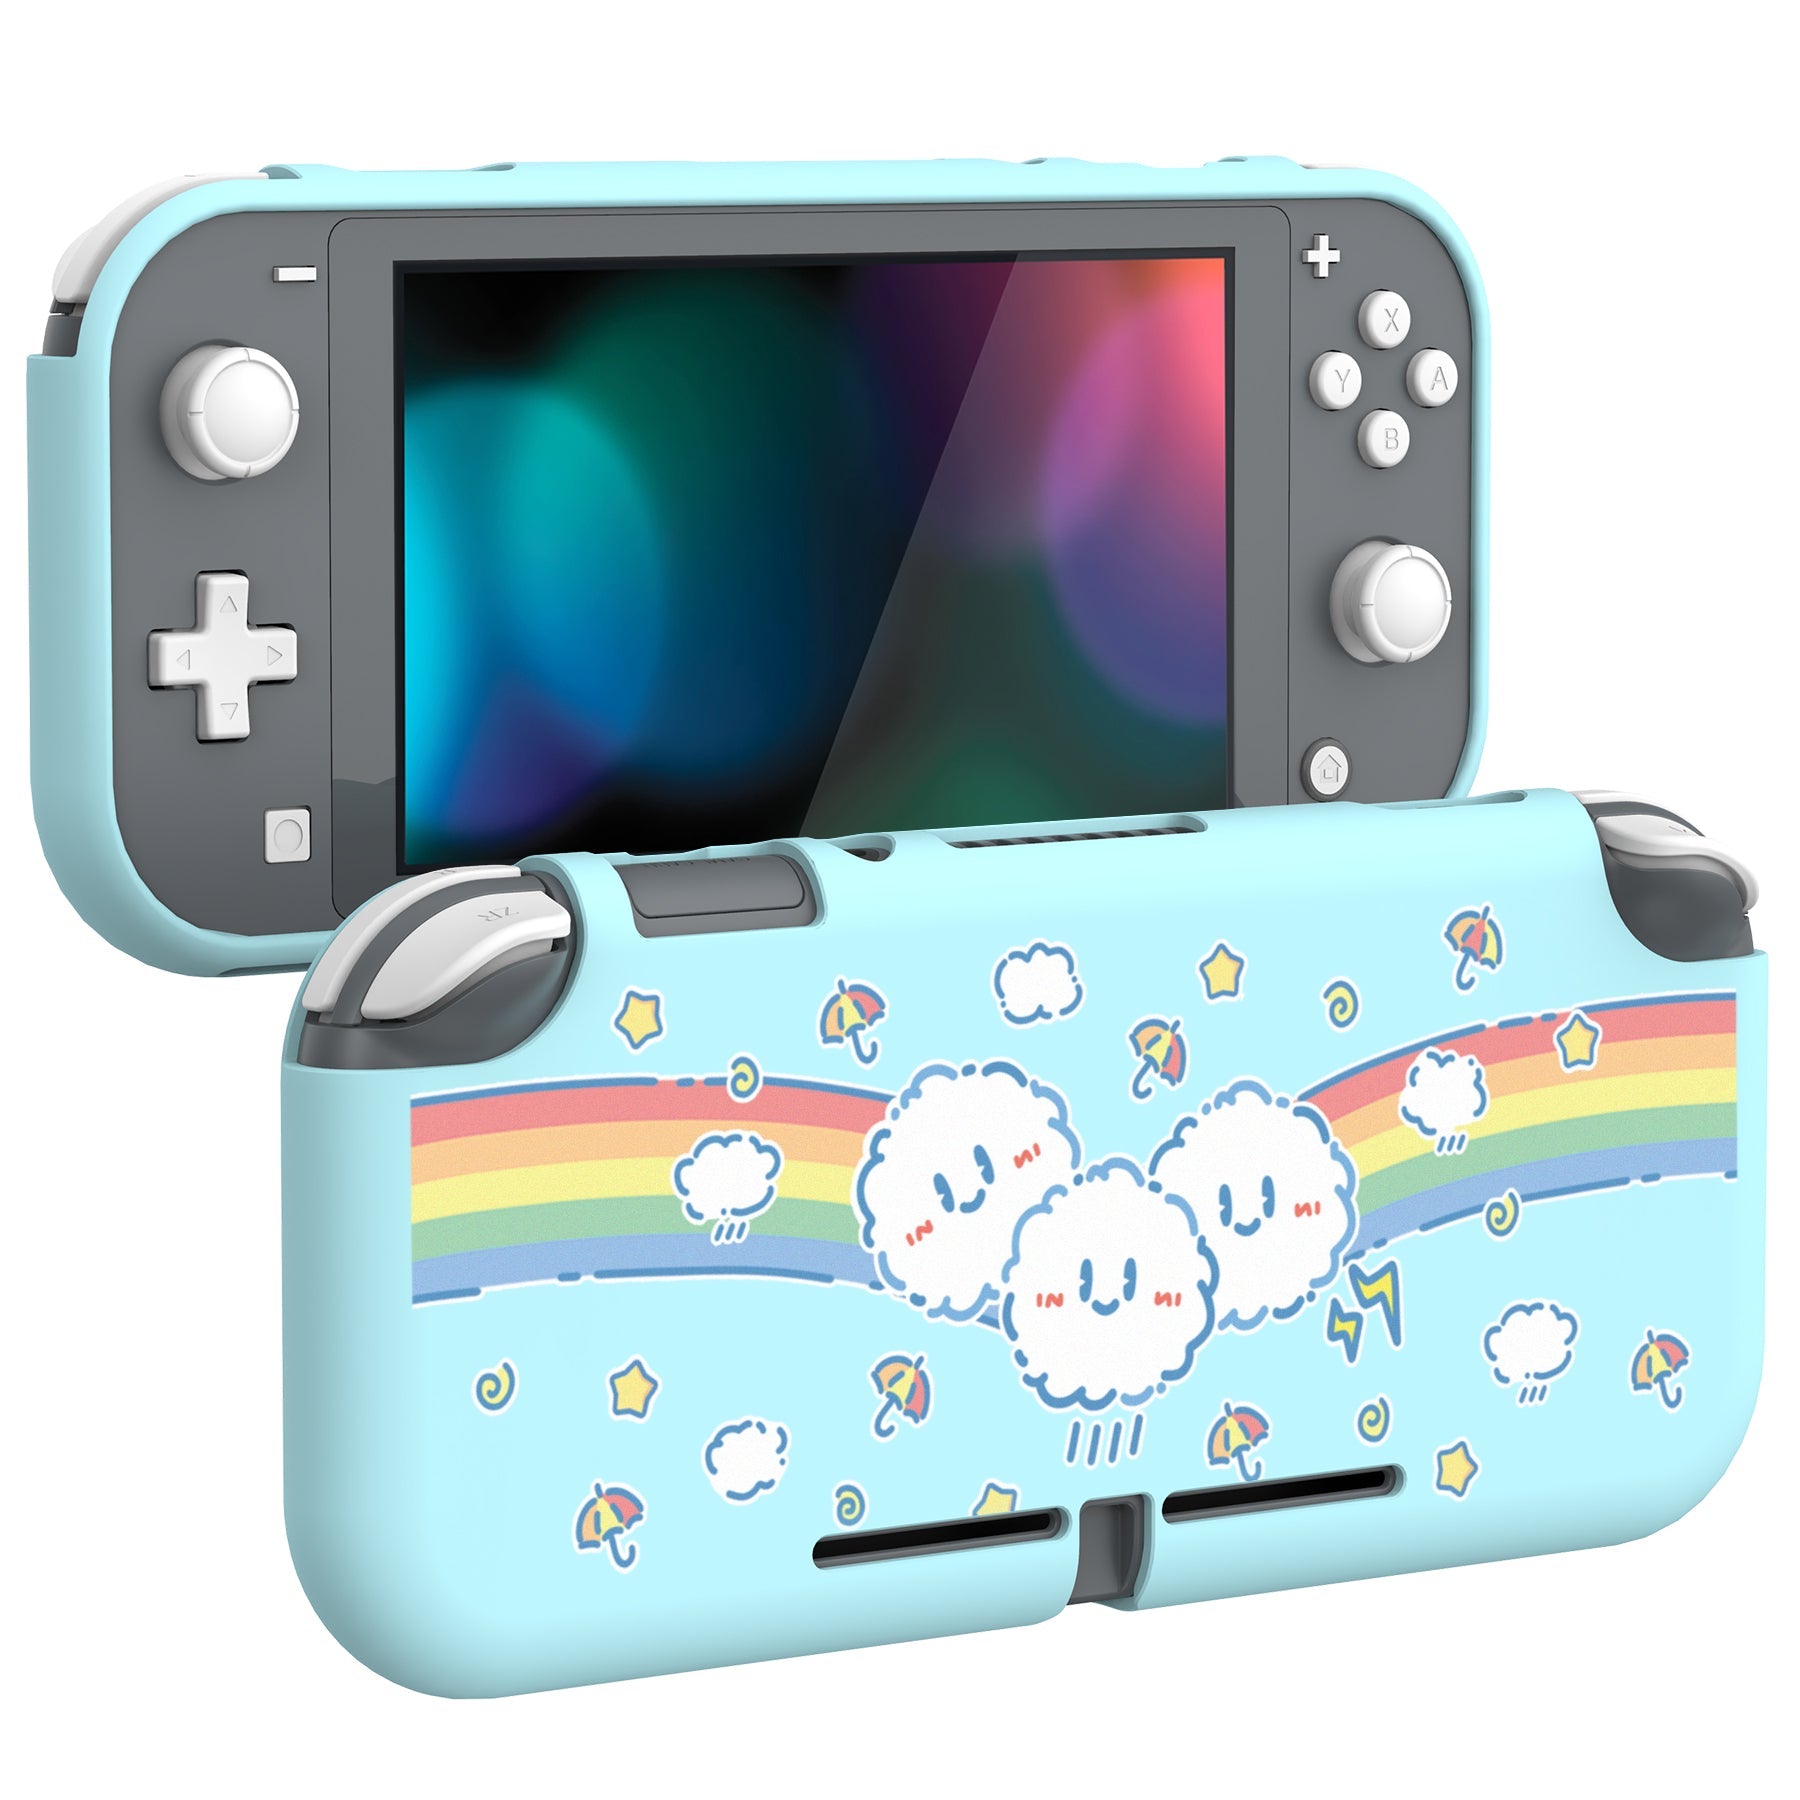 PlayVital Rainbow on Cloud Custom Protective Case for NS Switch Lite, Soft TPU Slim Case Cover for NS Switch Lite - LTU6008 PlayVital